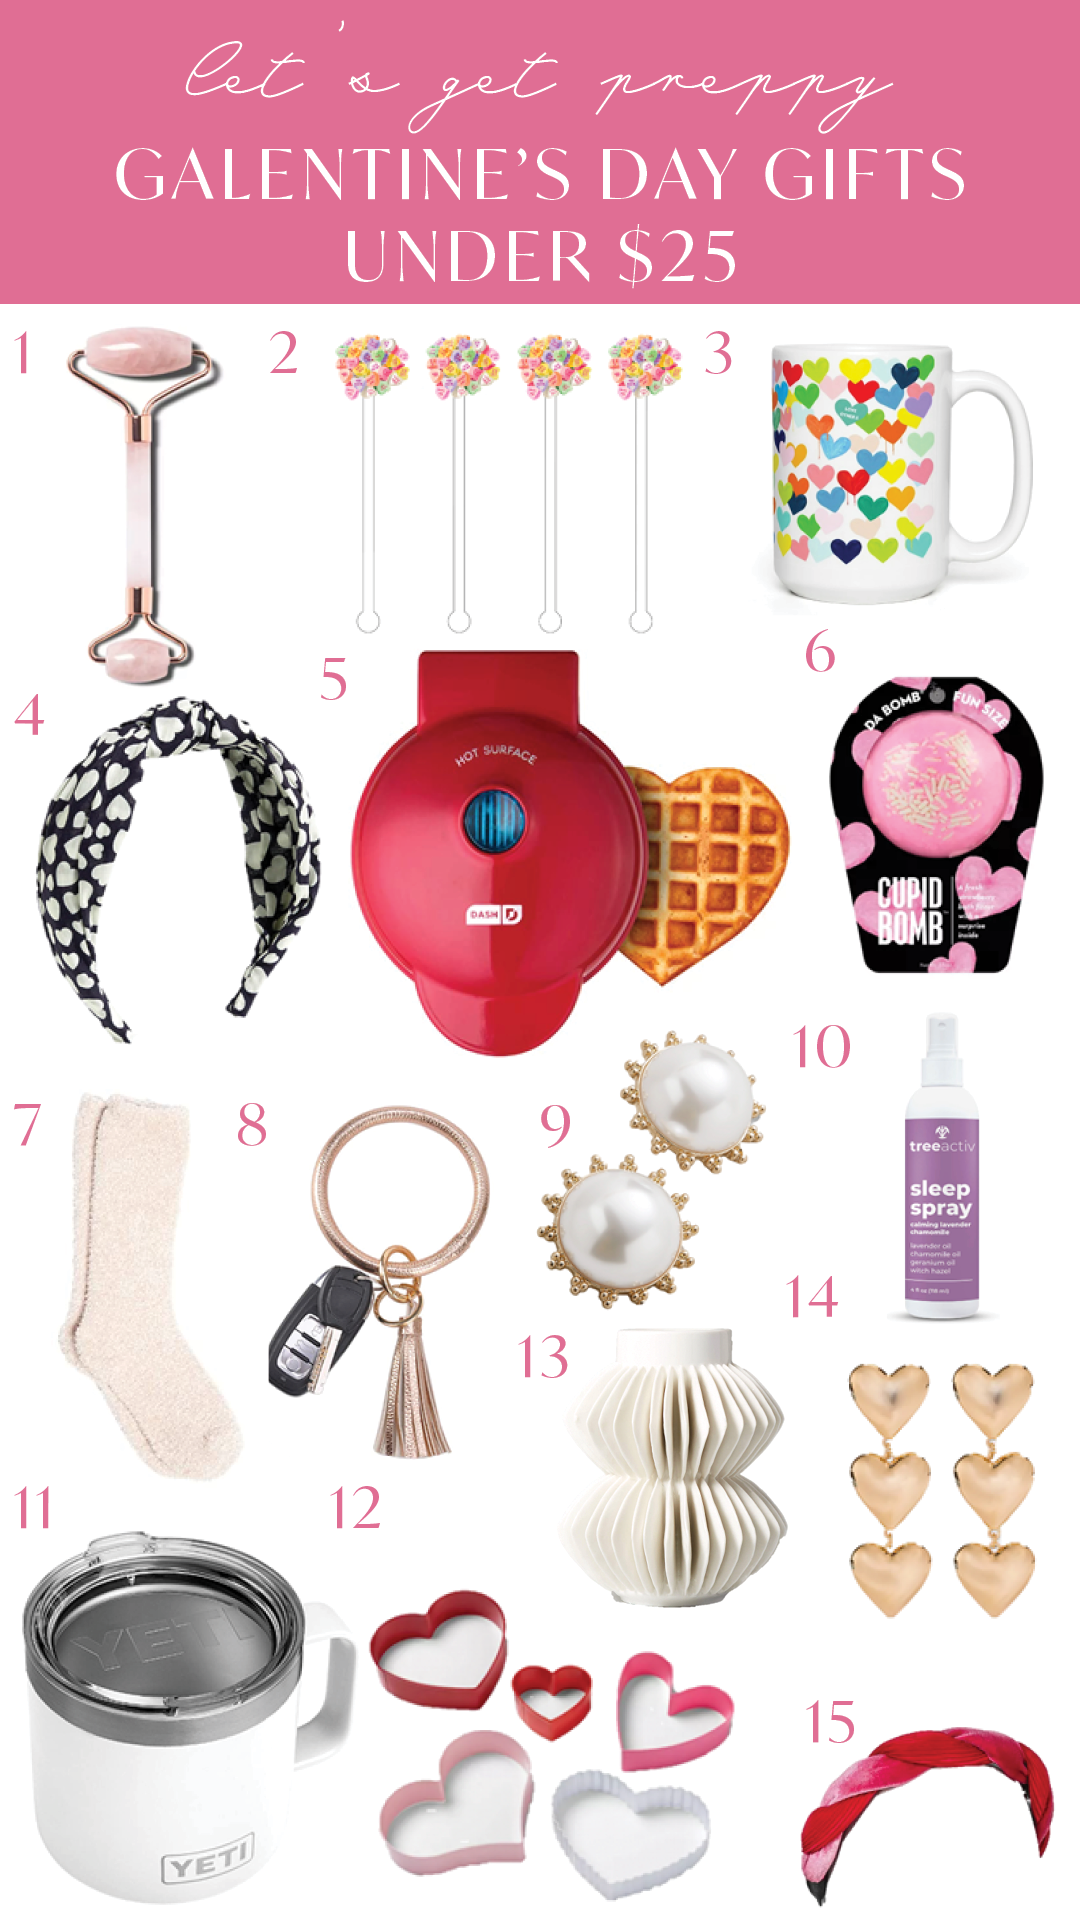 10 Cheap Valentine's Day Gifts Under $10 From